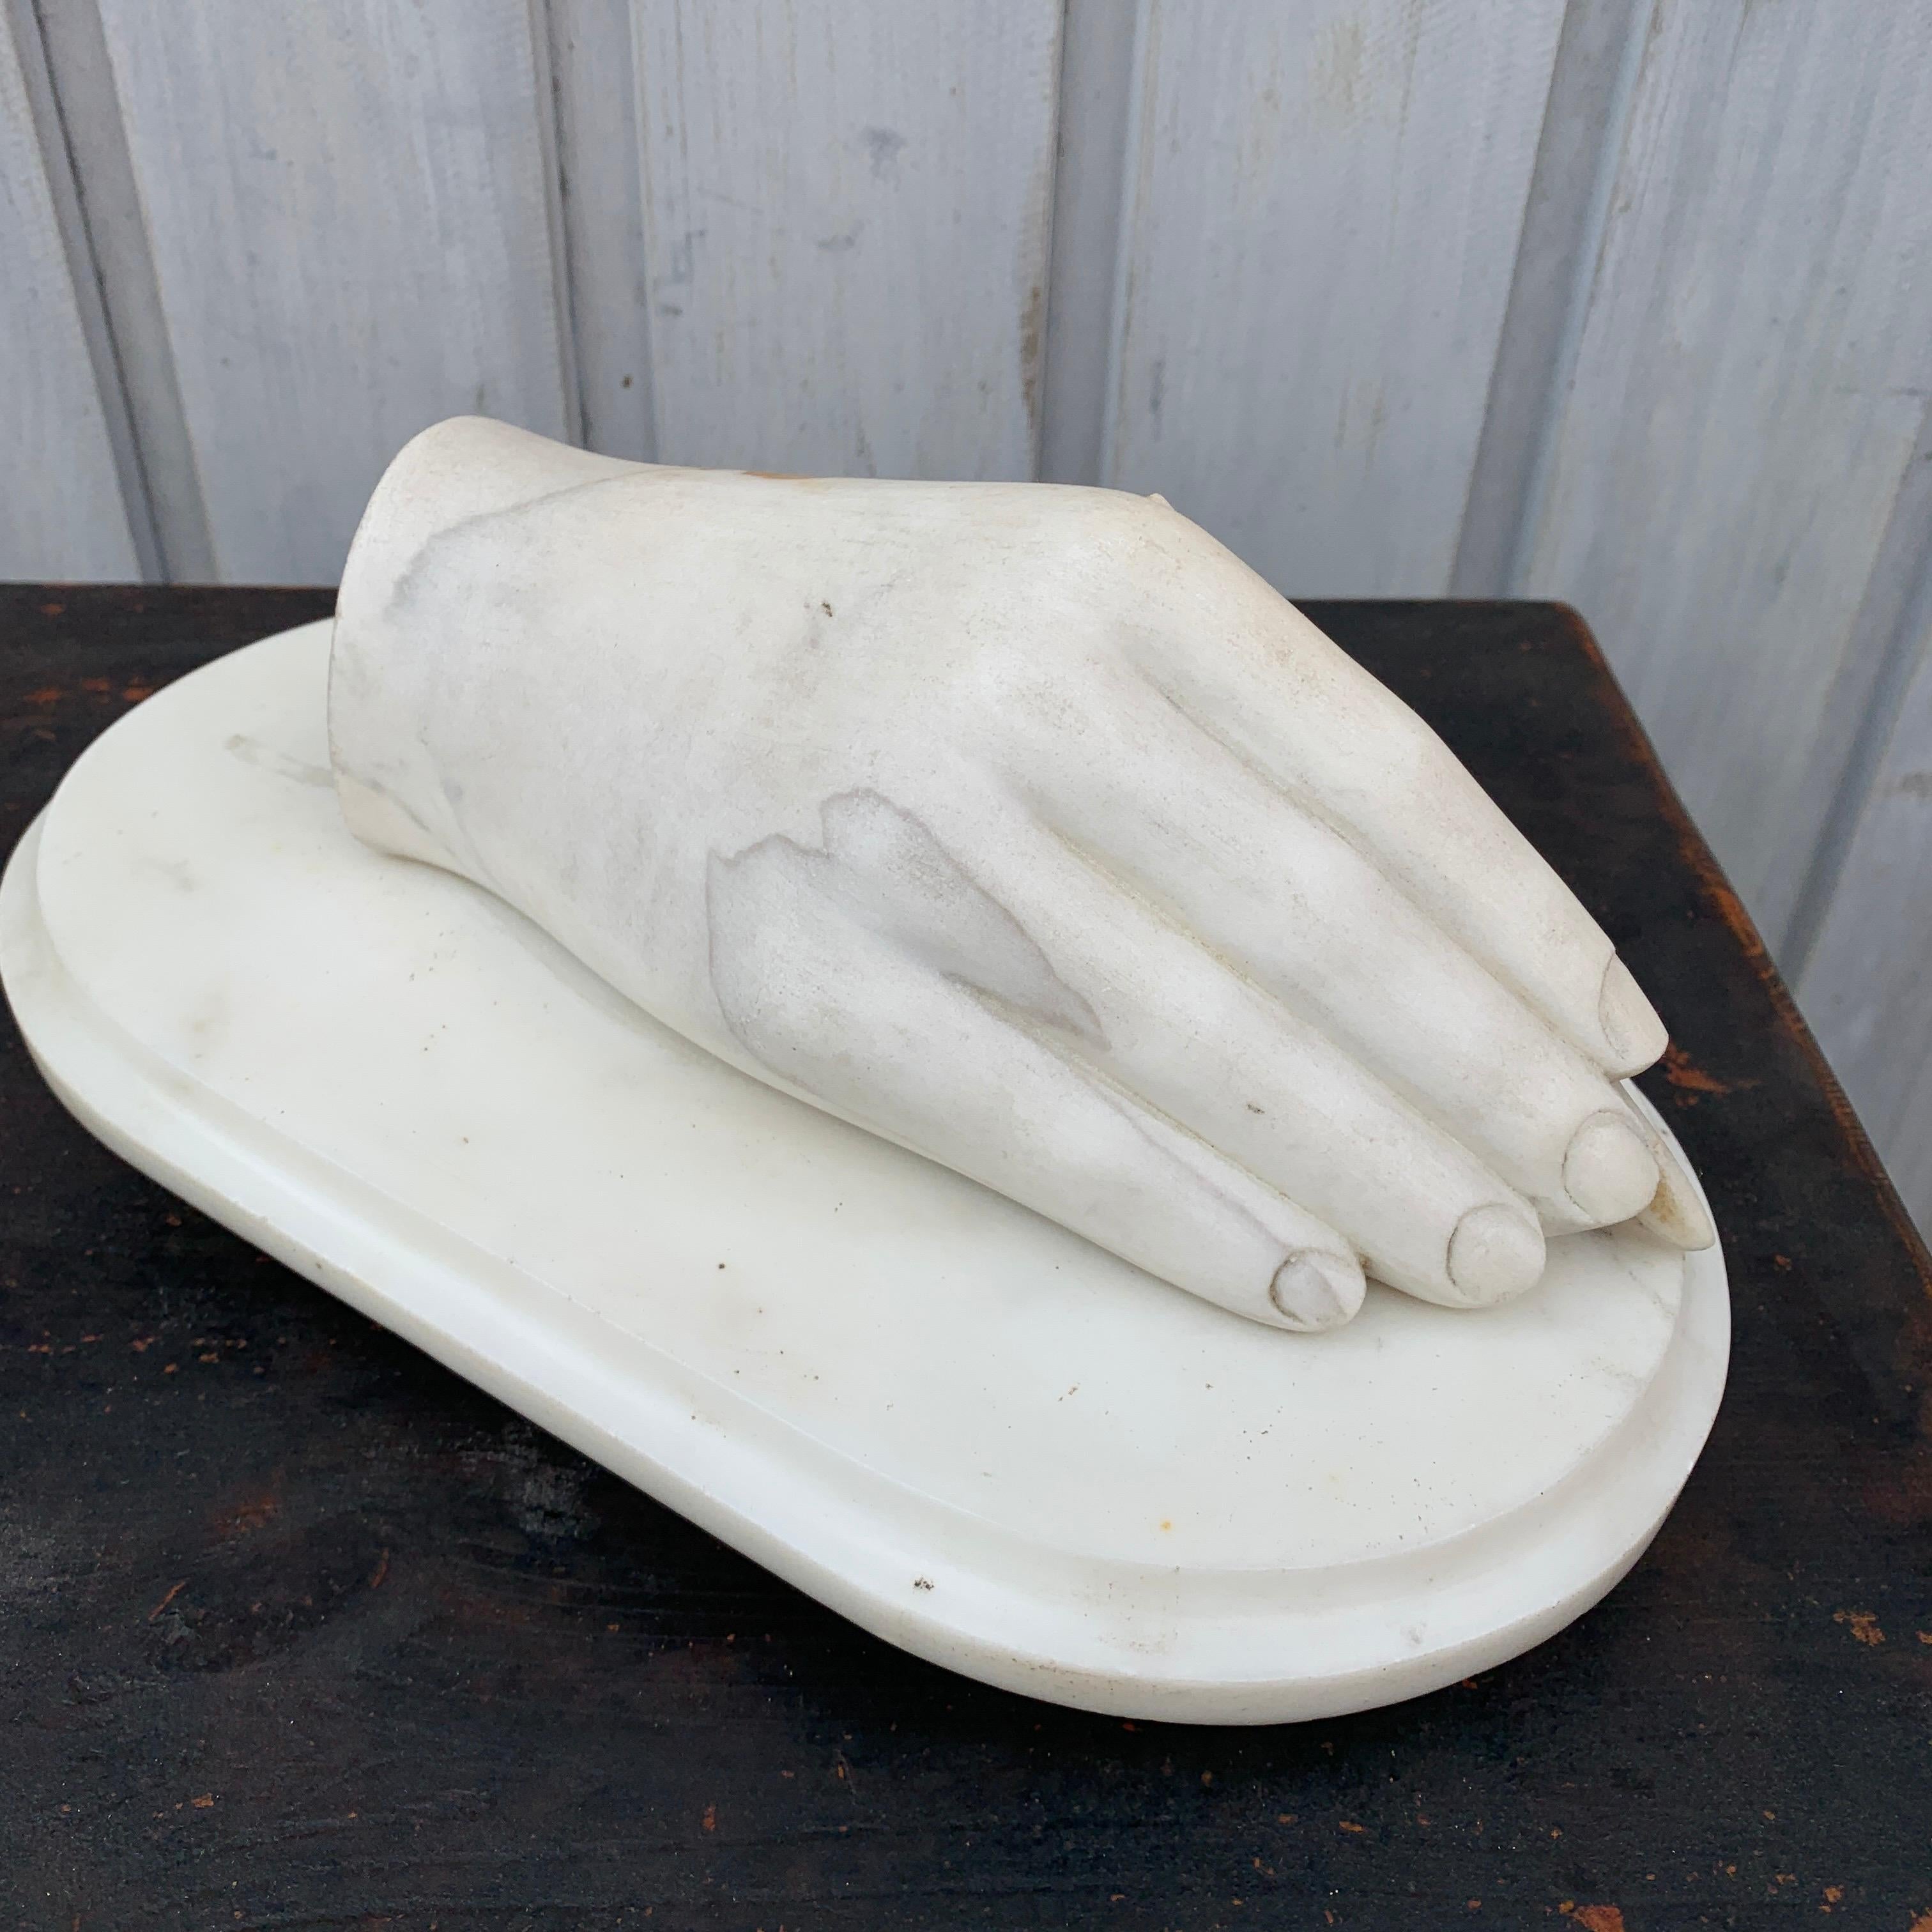 Early 19th Century white marble artist hand sculpture.
Delicate and smooth, this lovely white marble sculpture of a hand delicately holding a pen between it's fingers is the perfect gift for the writer or the artist in your life. The piece would be